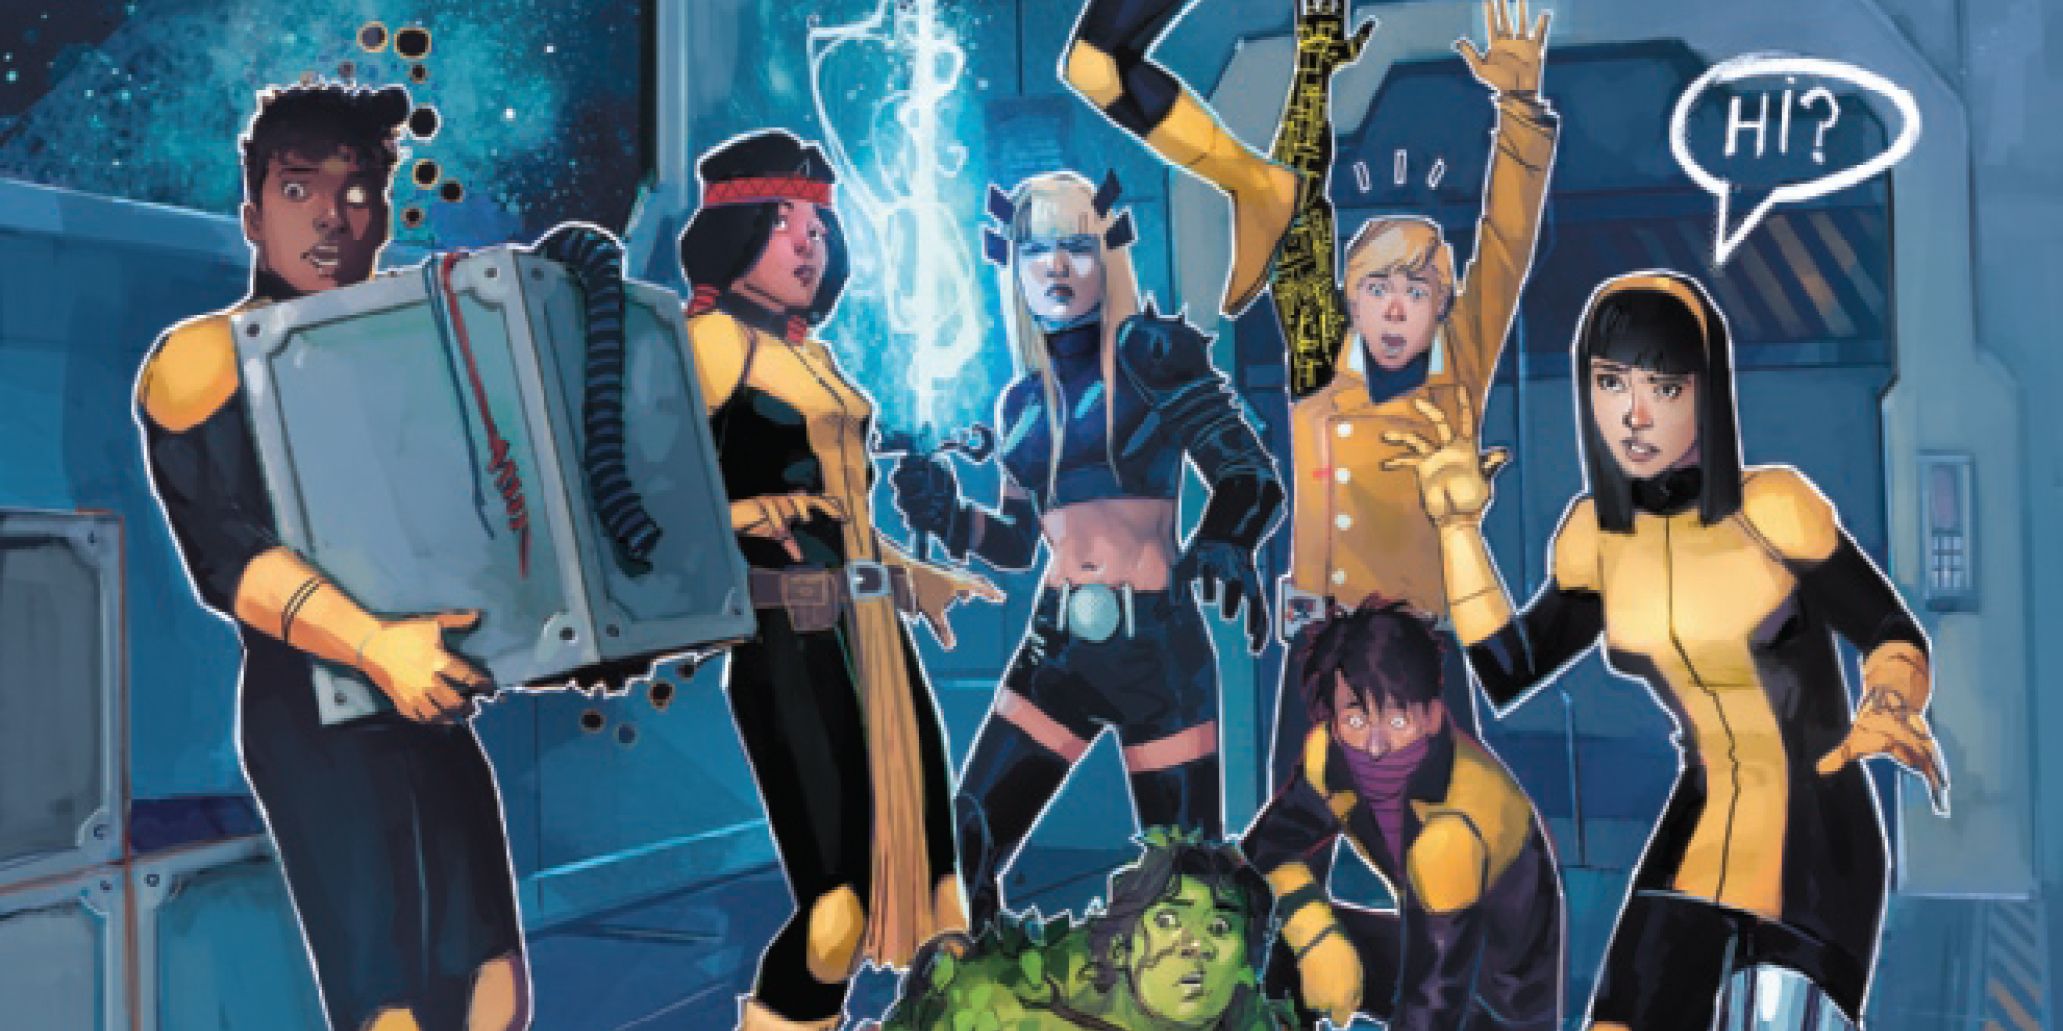 EXCLUSIVE: The New Mutants Get a Brutal Prison Sentence